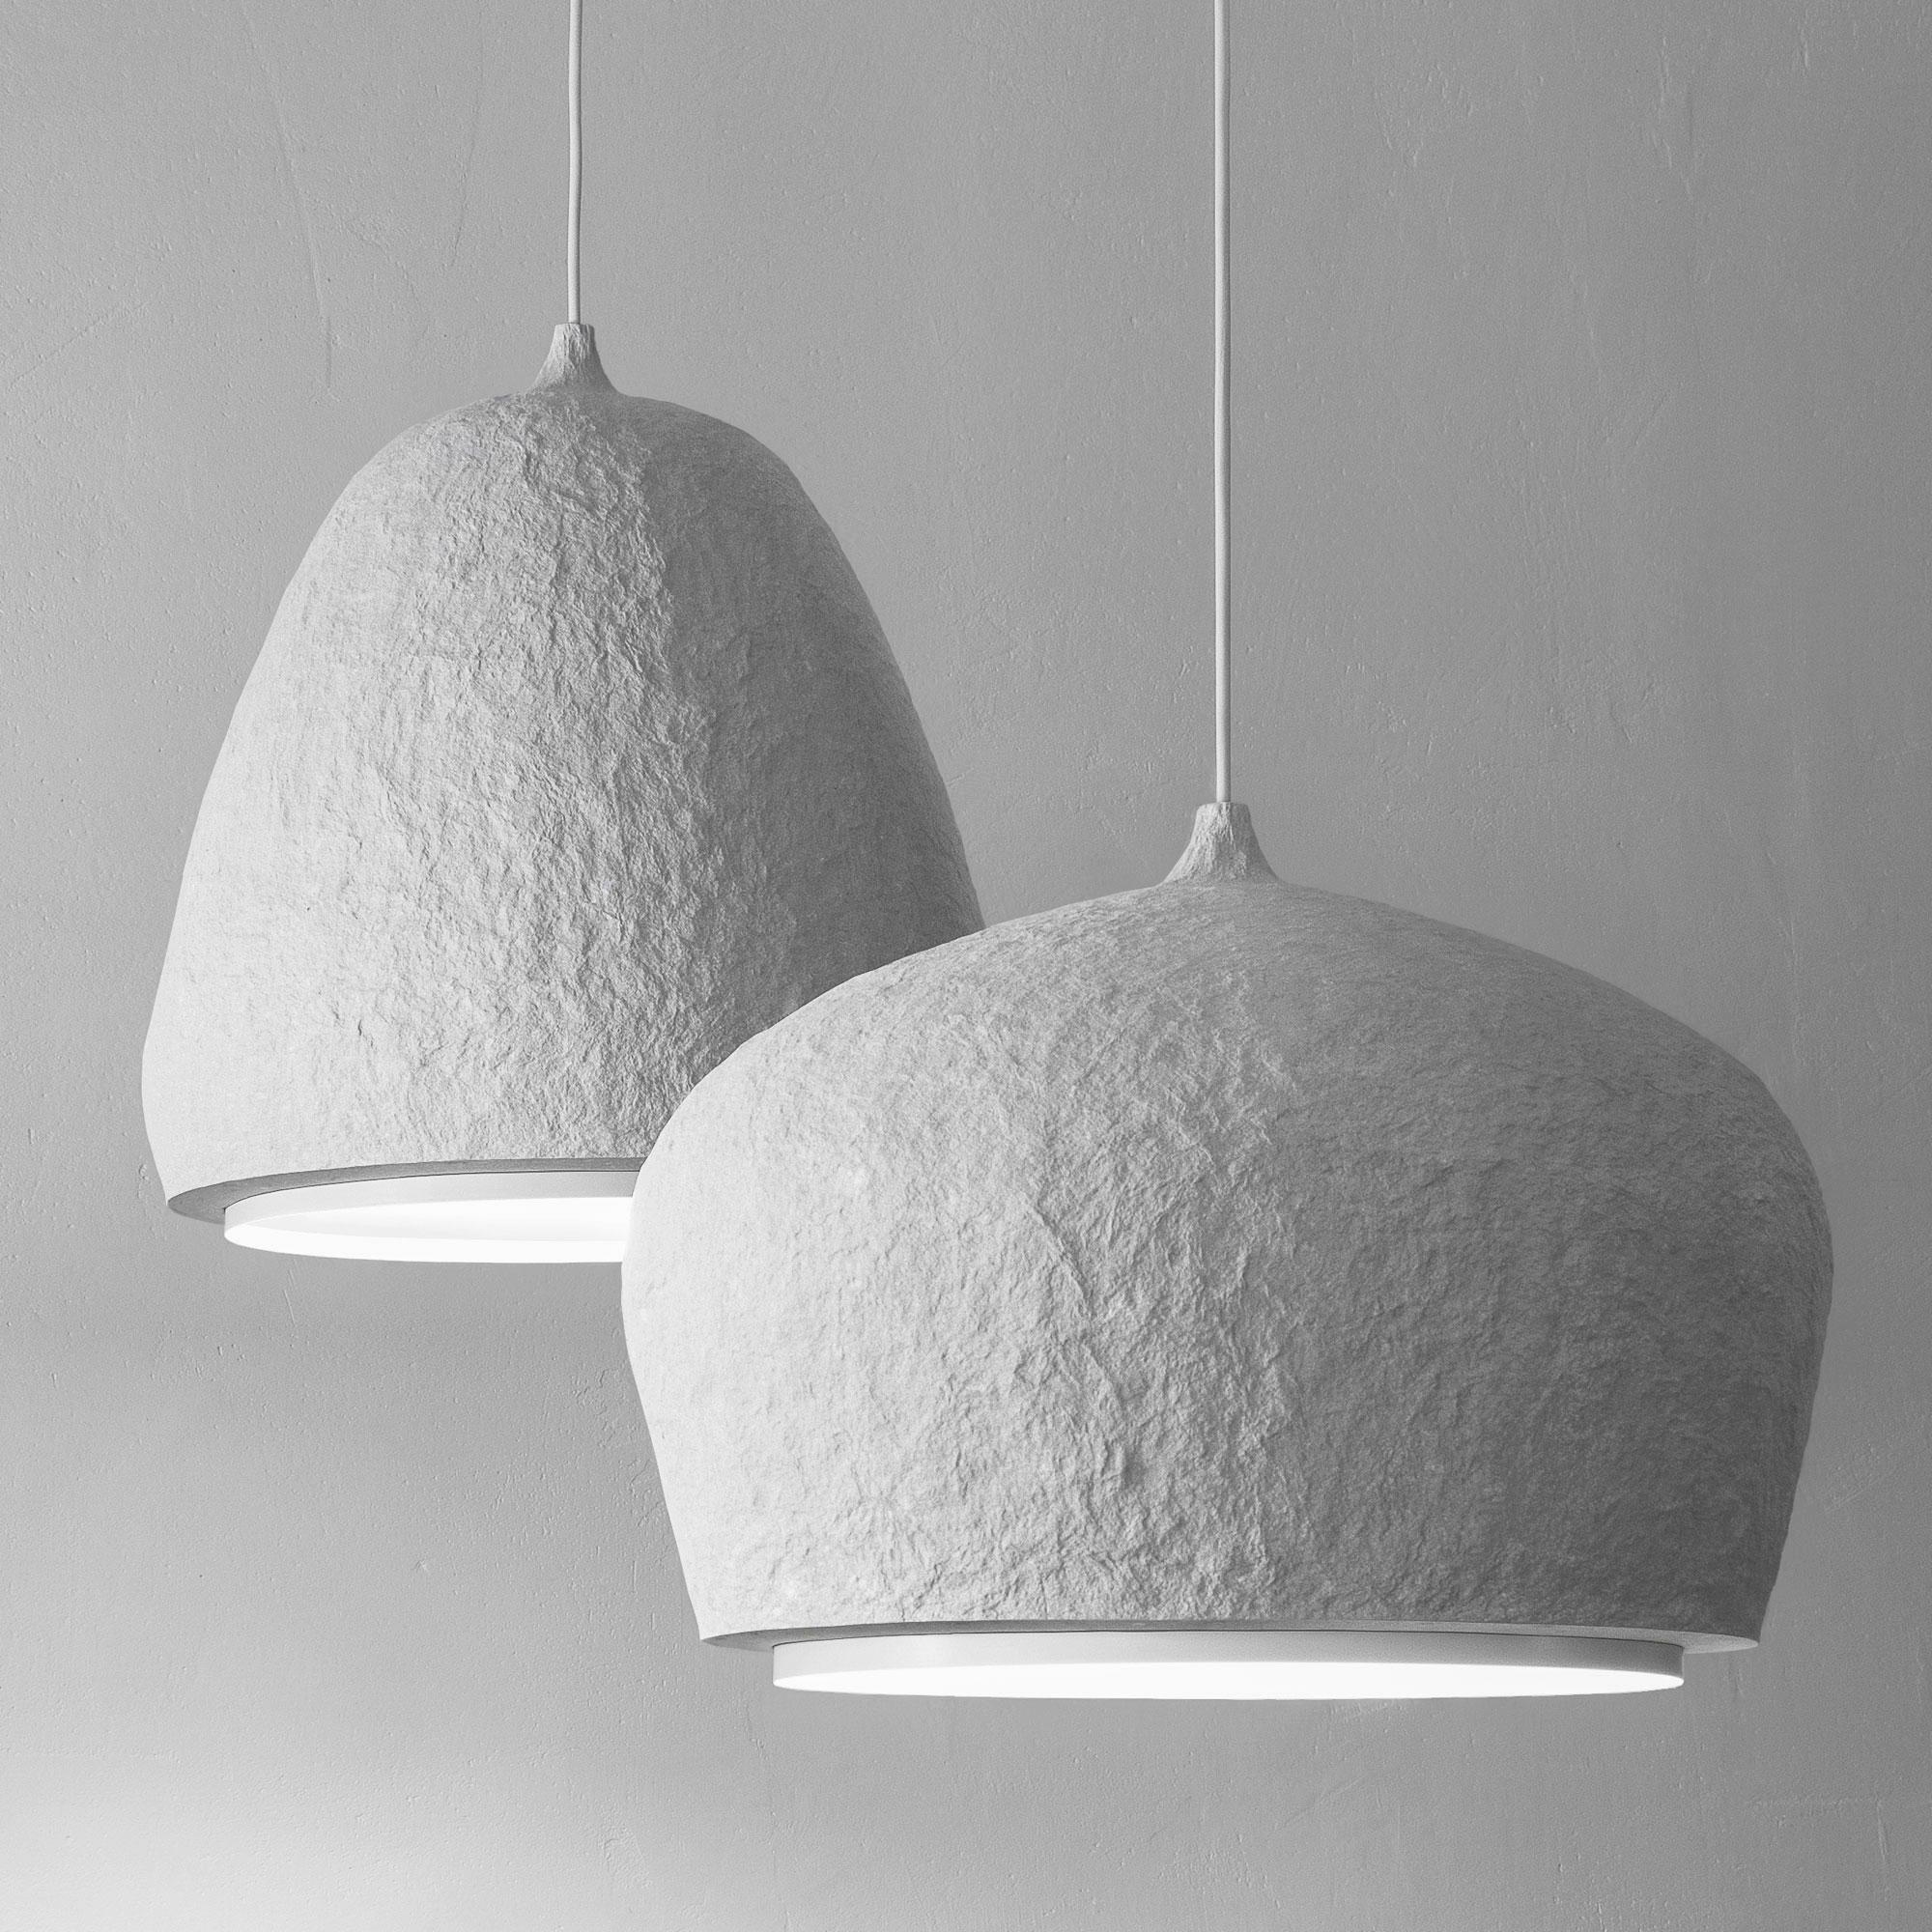 Gray Industrial Pendant Lamp, Minimalist Lighting by Donatas Žukauskas In Stock In New Condition For Sale In Rudamina, LT